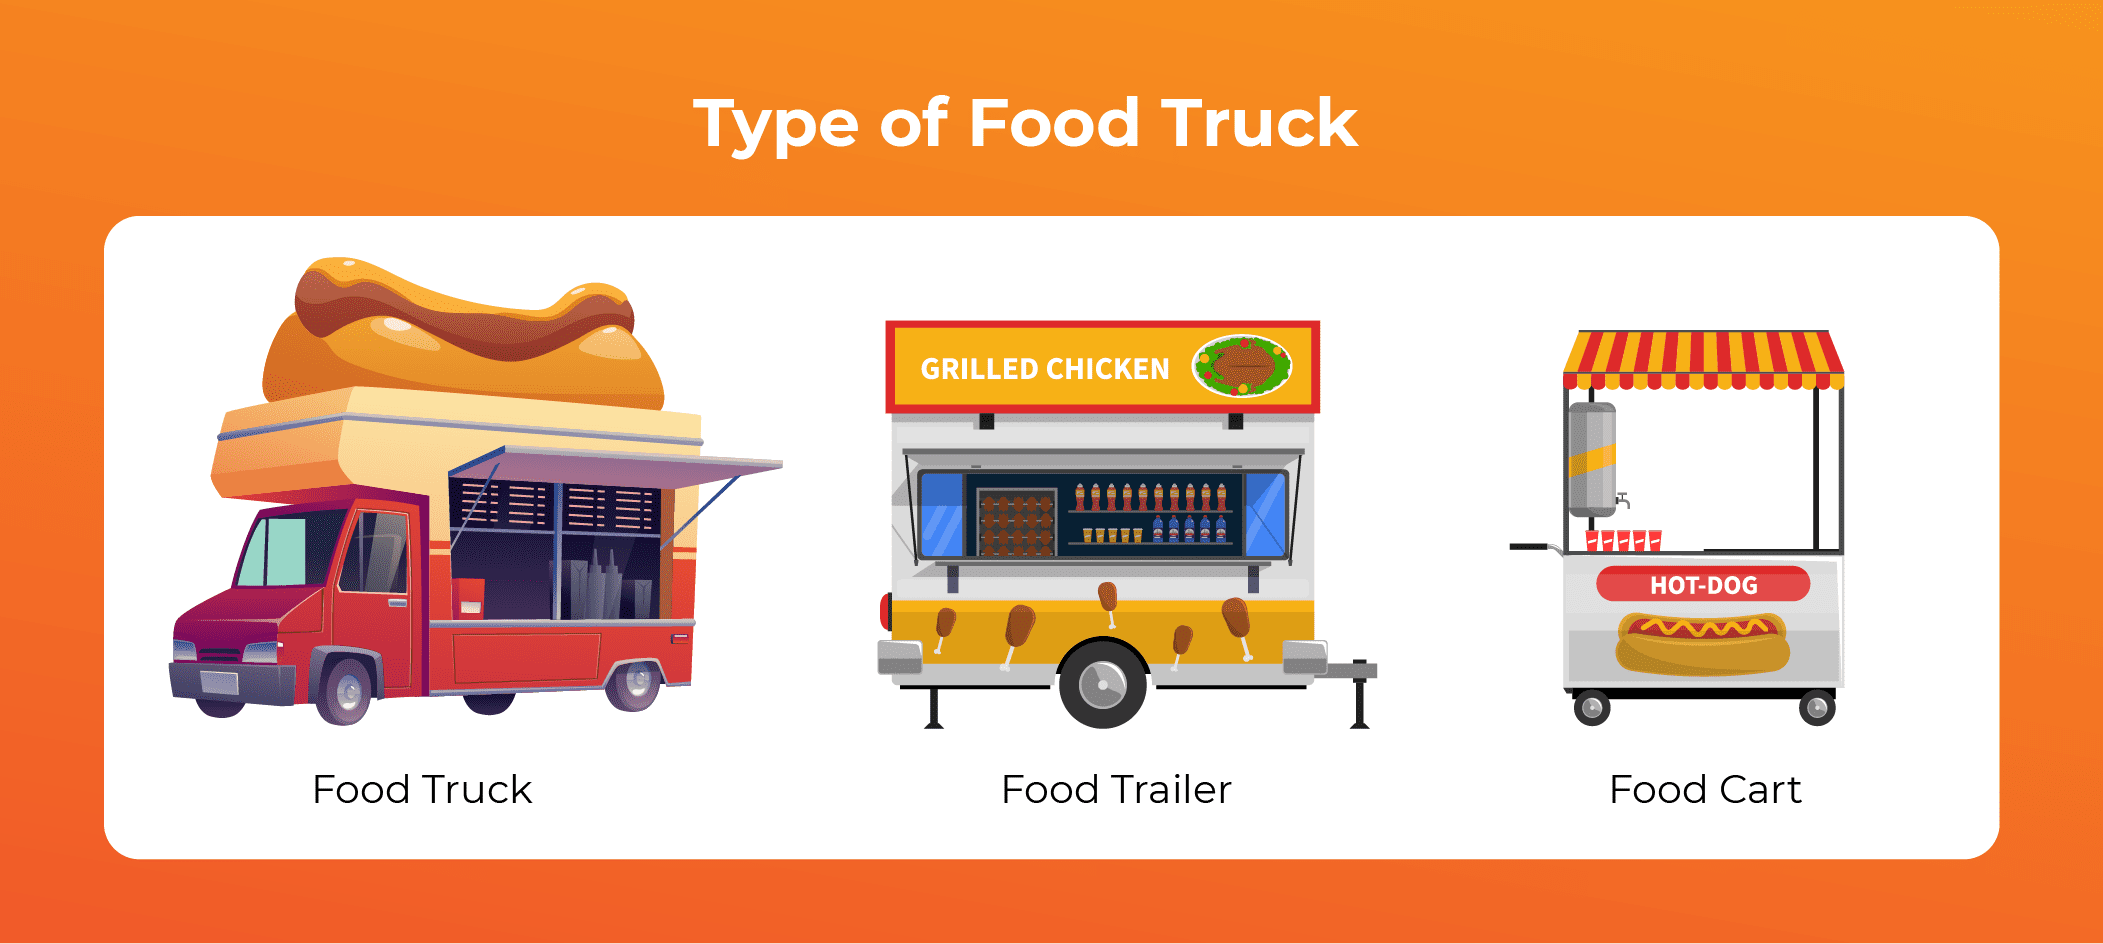 Food truck, trailer and cart